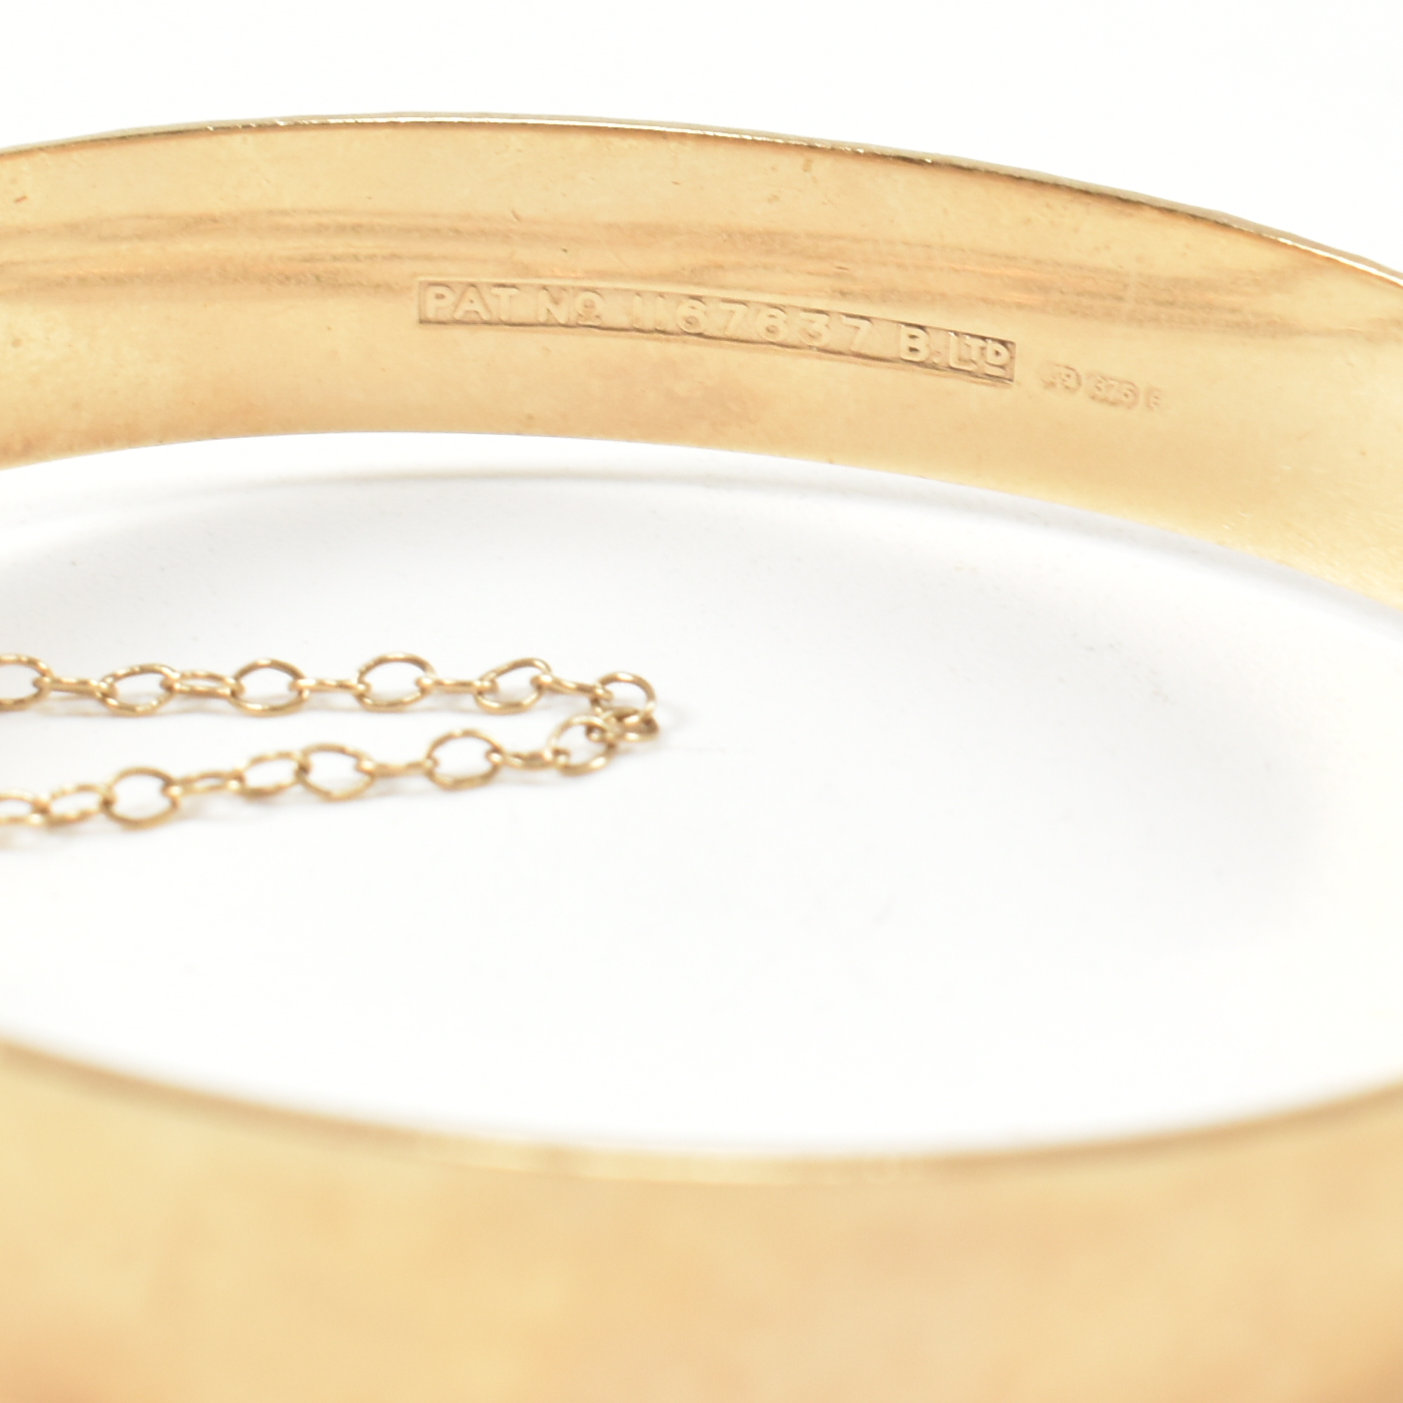 HALLMARKED 9CT GOLD HINGED BANGLE & A PAIR OF 9CT GOLD HOOP EARRINGS - Image 6 of 8